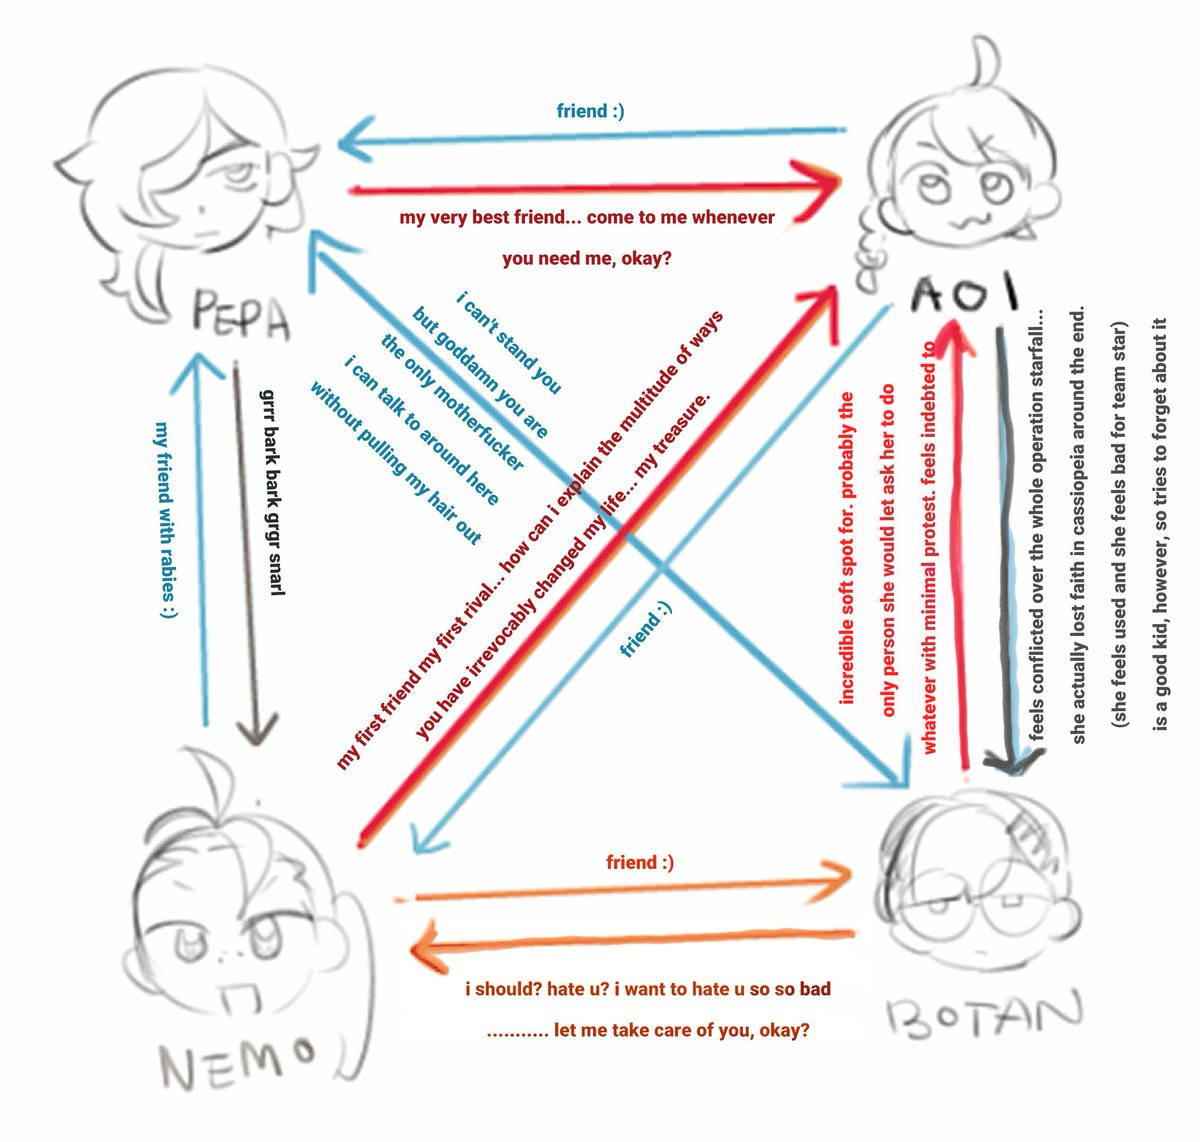 gomna post this rlship chart i posted on circle awhile back.... i changed my mind..... all these arrows r platonic (as of their situation as of the end of the game) 